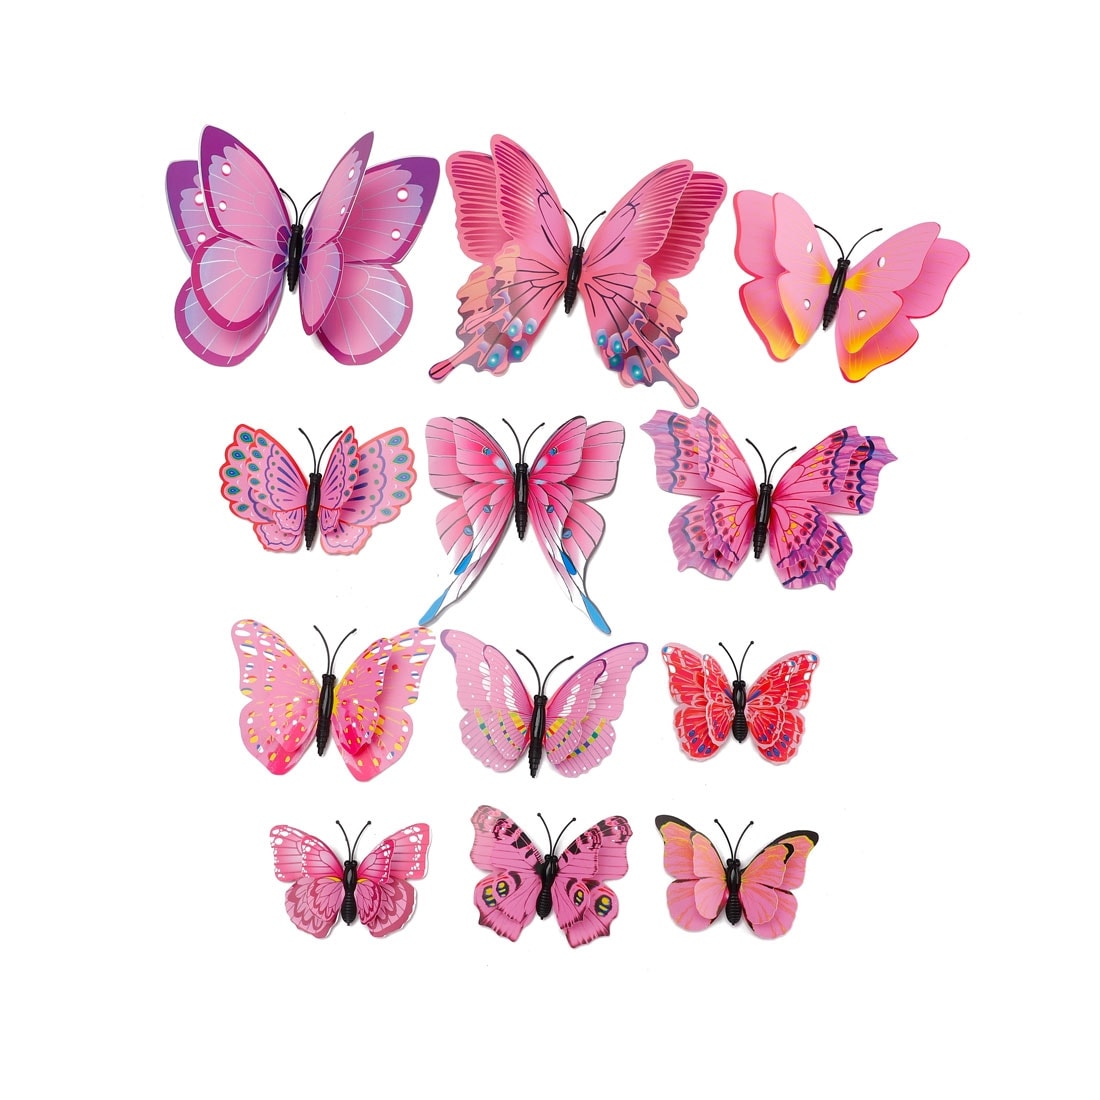 Clest F&H 12pcs 3D Art Butterfly Decal Wall Sticker Home Decor Room Decoration Christmas Gift Pink 